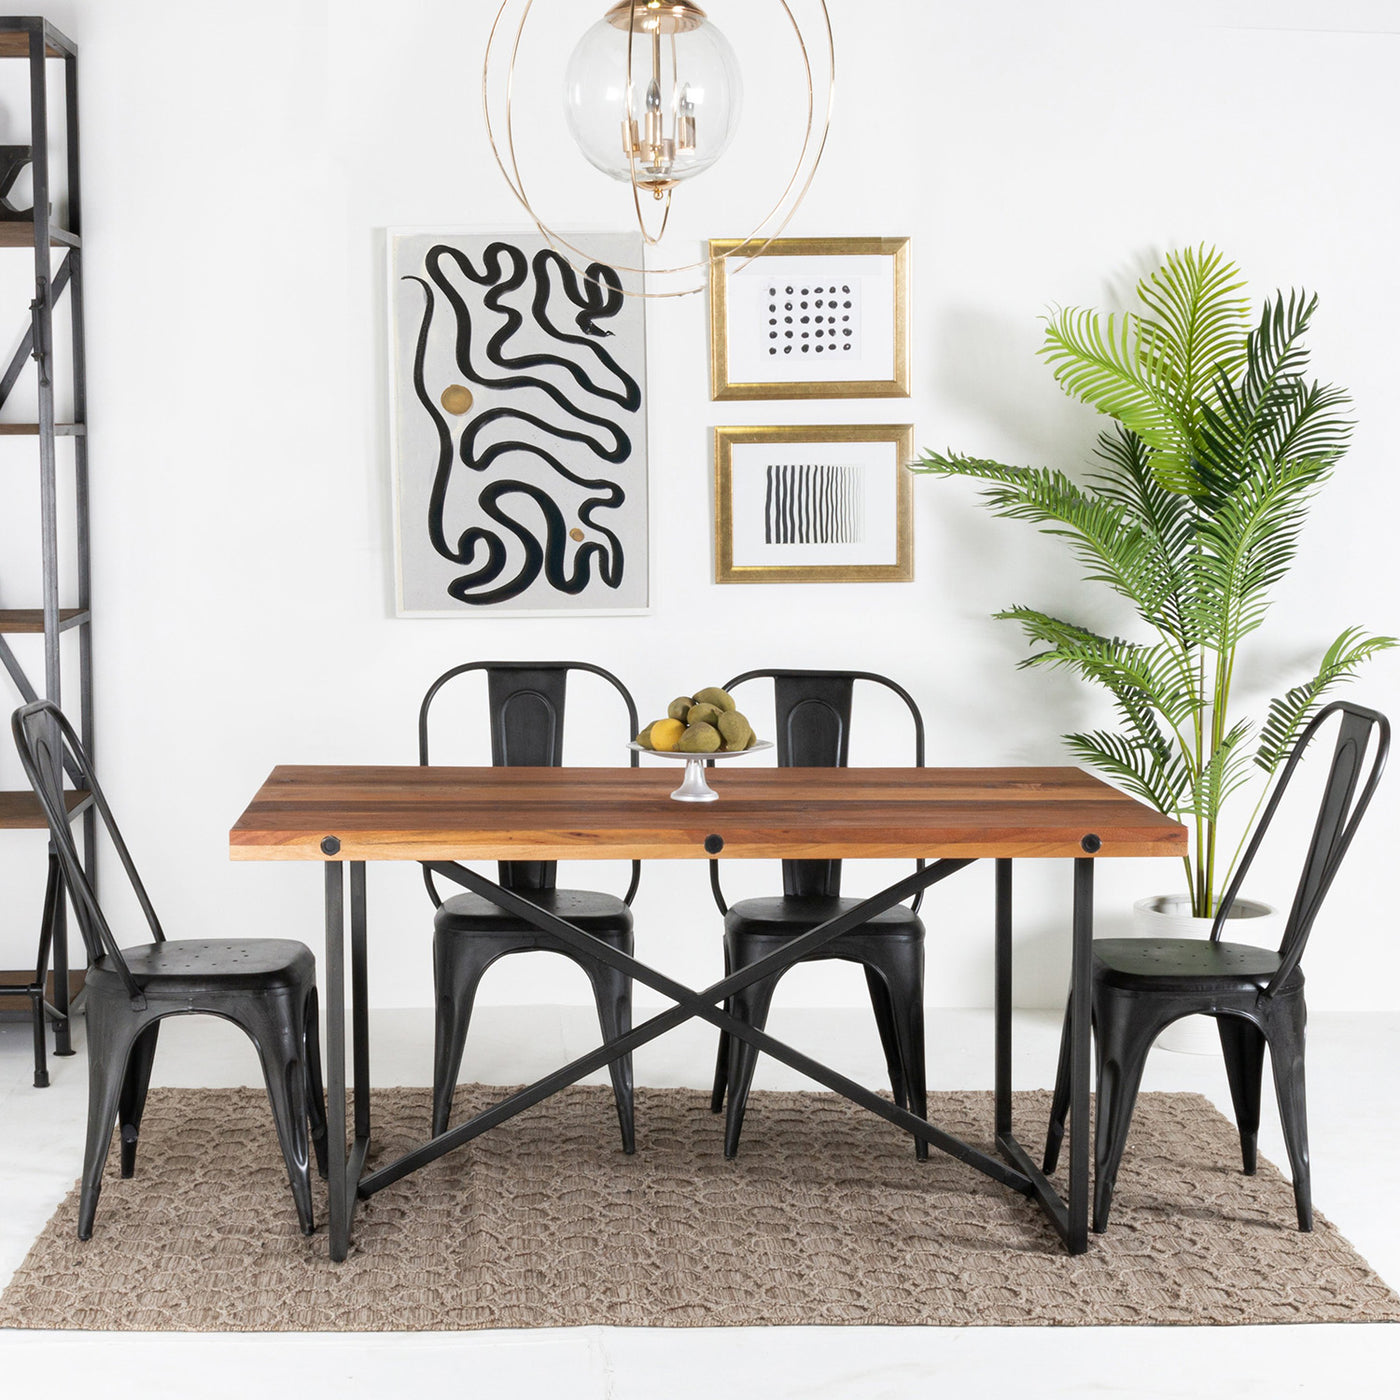 Railwood 6-Seat Dining Table in Mid-tone Brown Finish